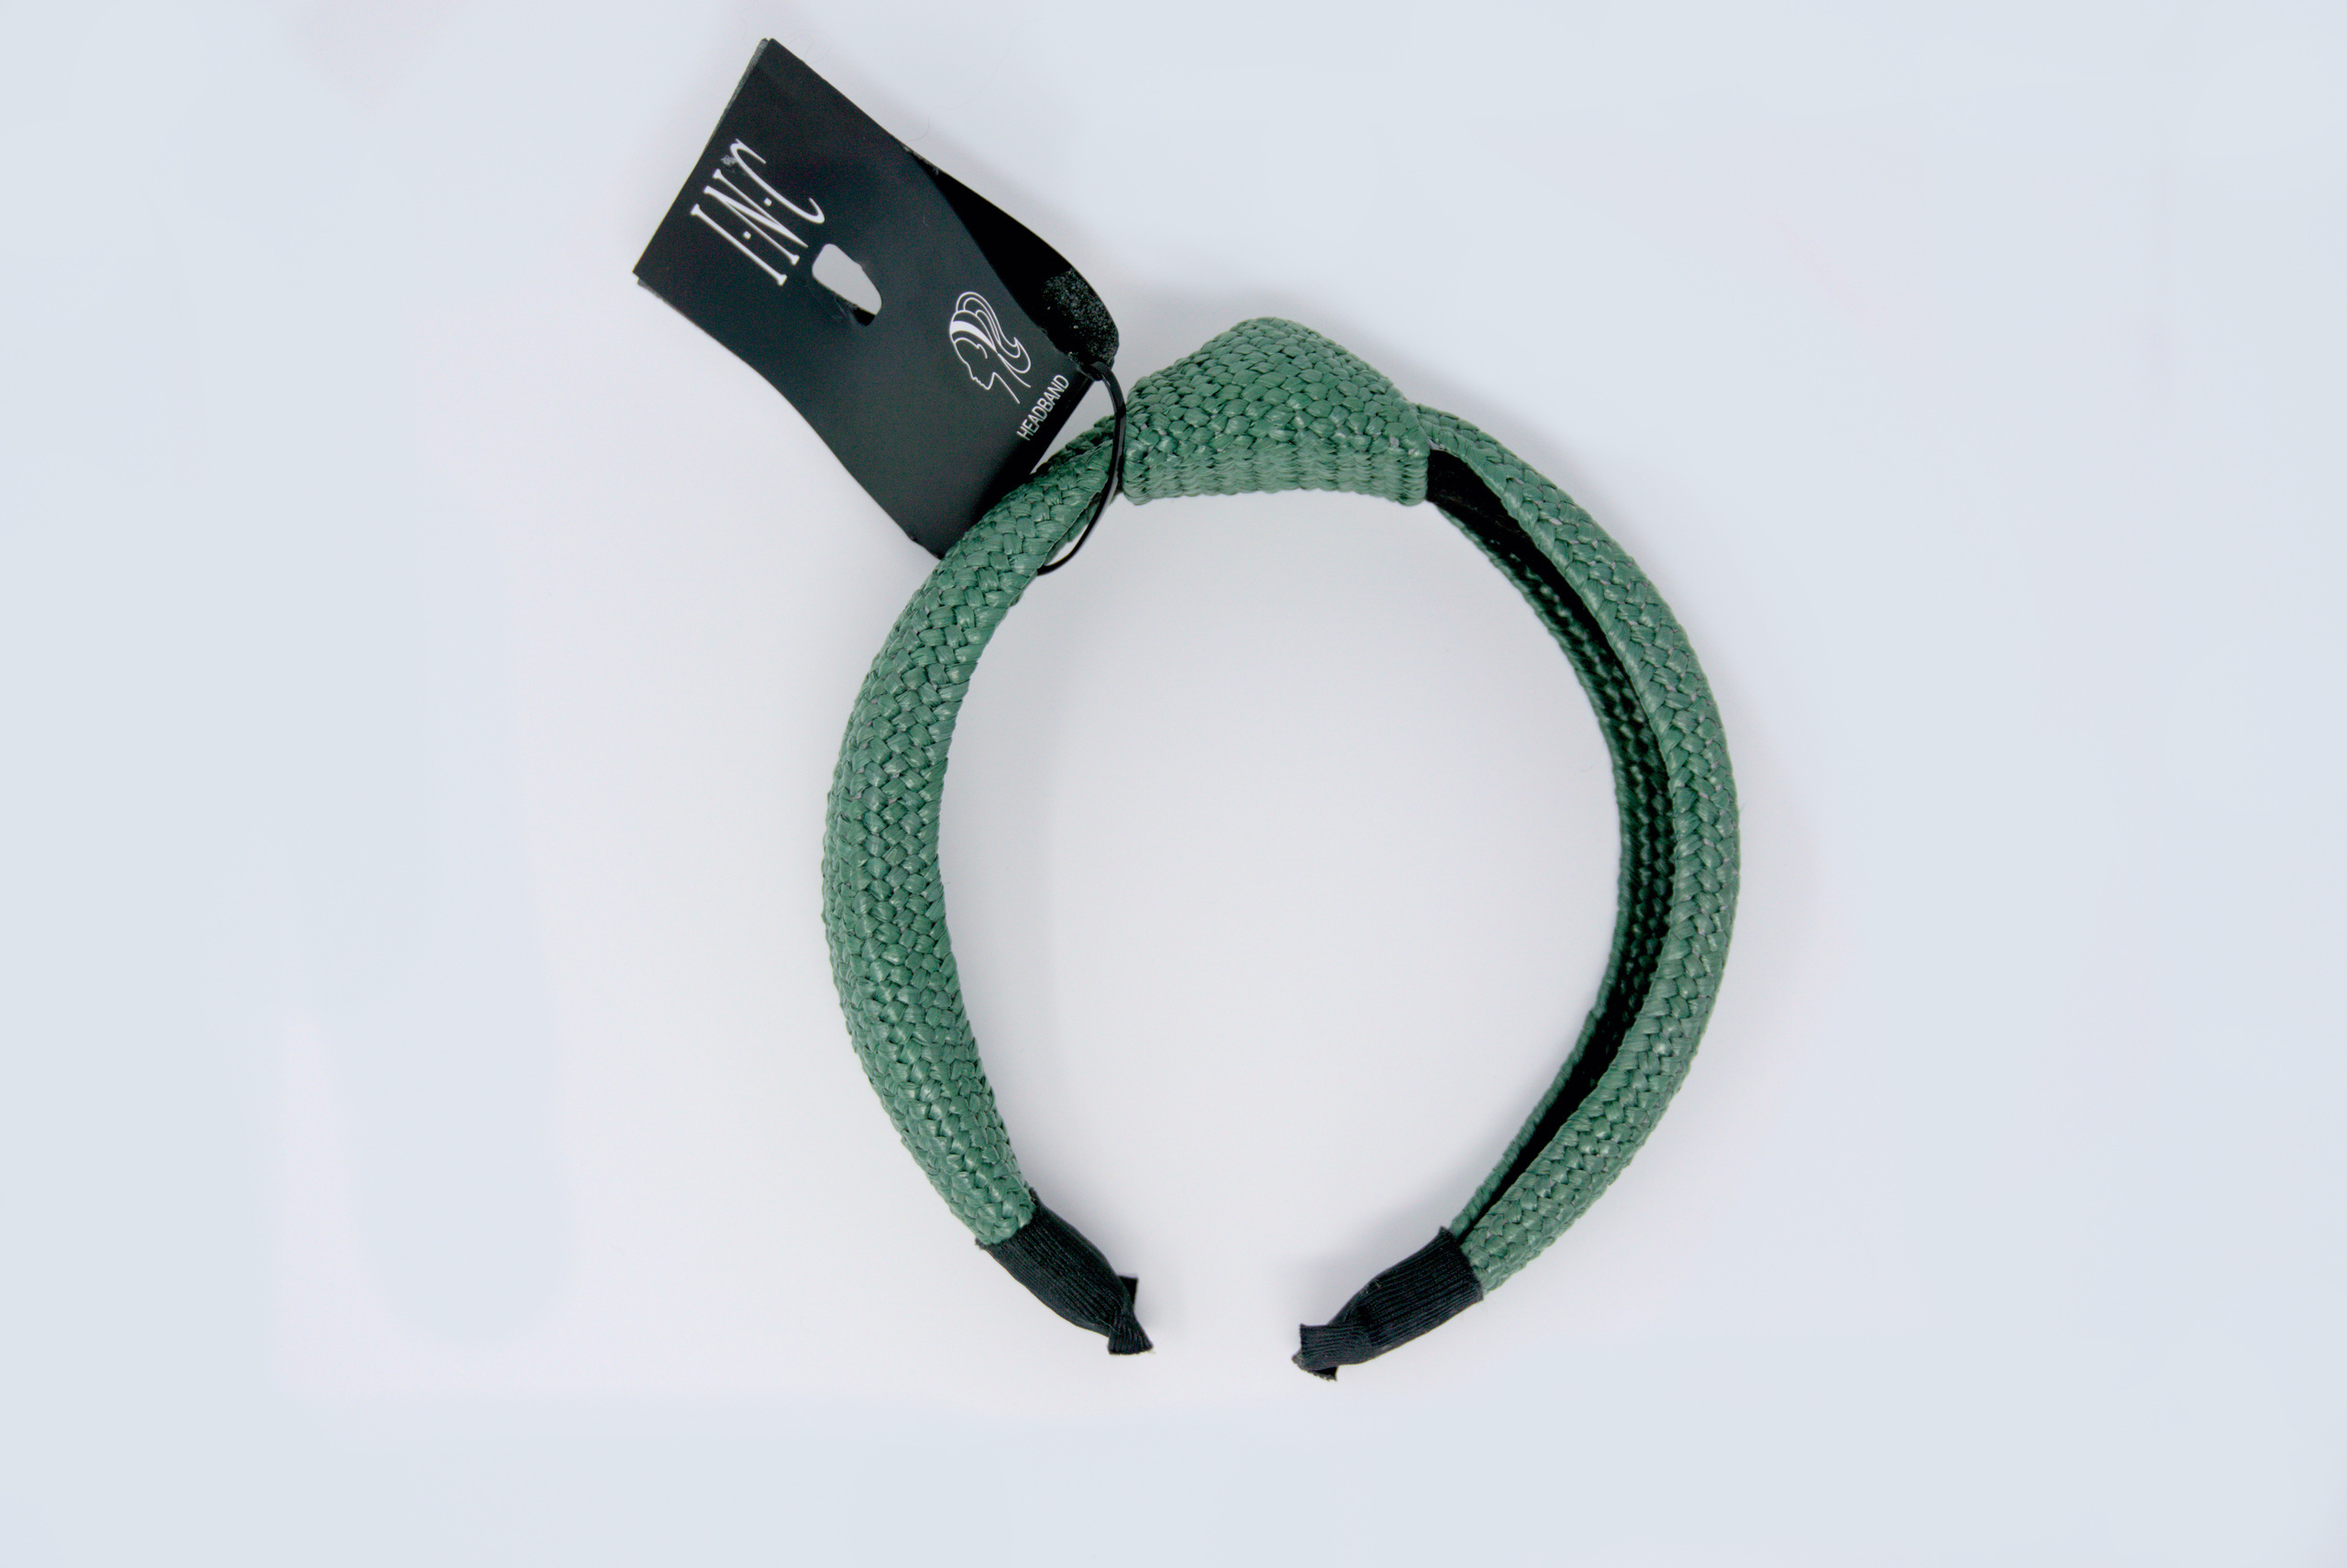 Charm and Lovely Quality Fashion Accessories introduces INC Raffia-Woven Knotted Headband color Green, Raffia straw; polyester. Approx. diameter: 6-1/2"